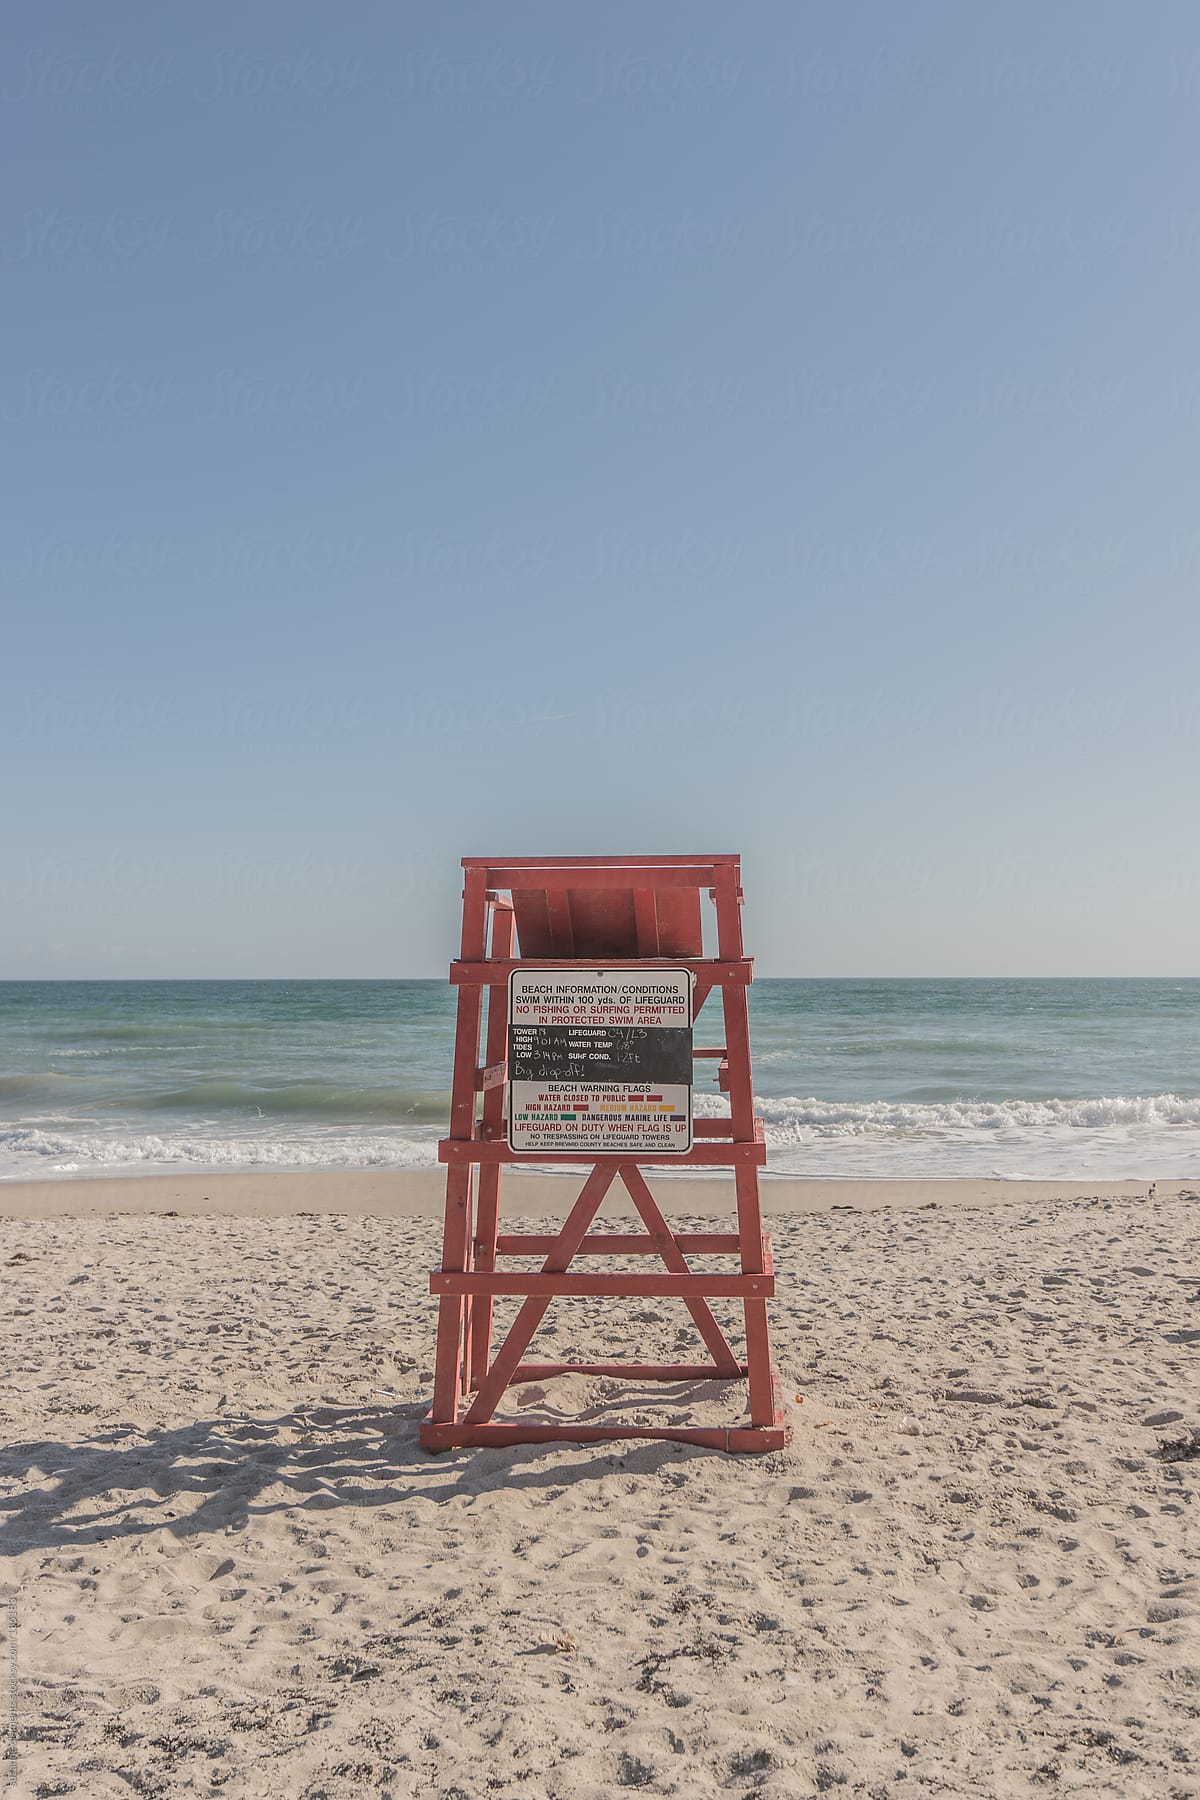 Lifeguard station at the empty beach